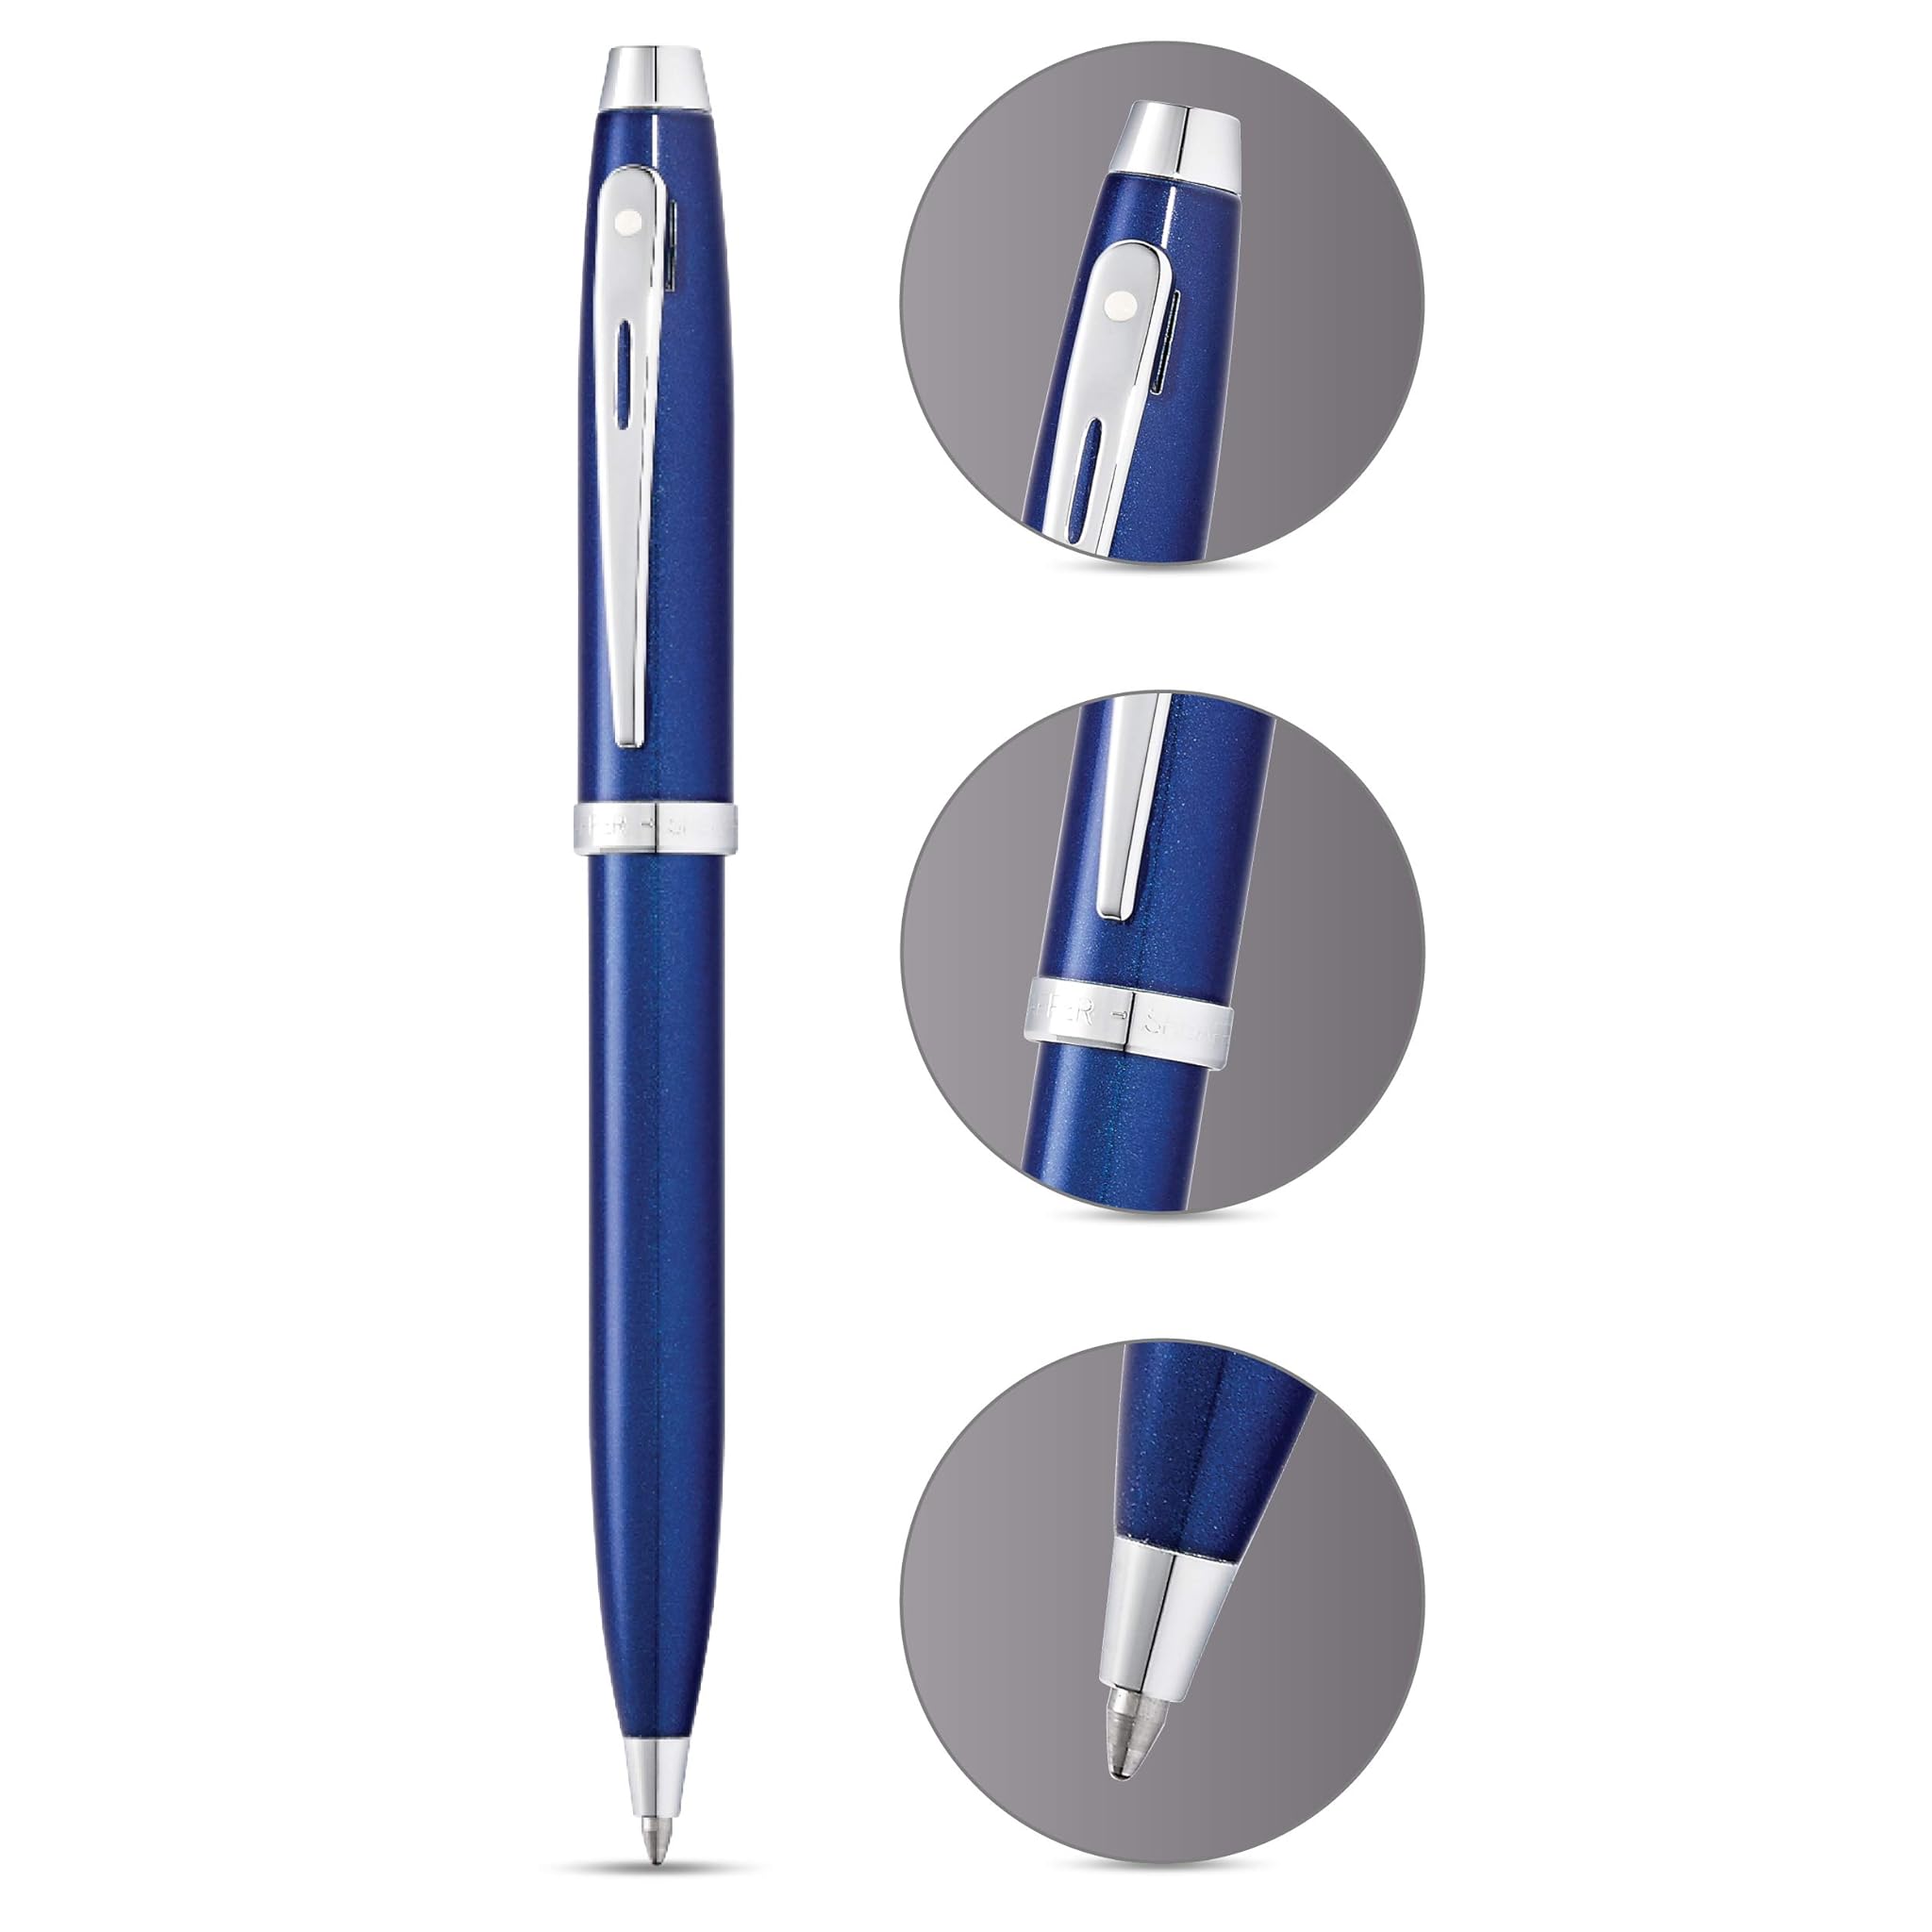 WP23902-PEN SHEAFFER GIFT 100 A 9339 - GLOSSY BLUE LACQUER WITH CHROME PLATE TRIM BP